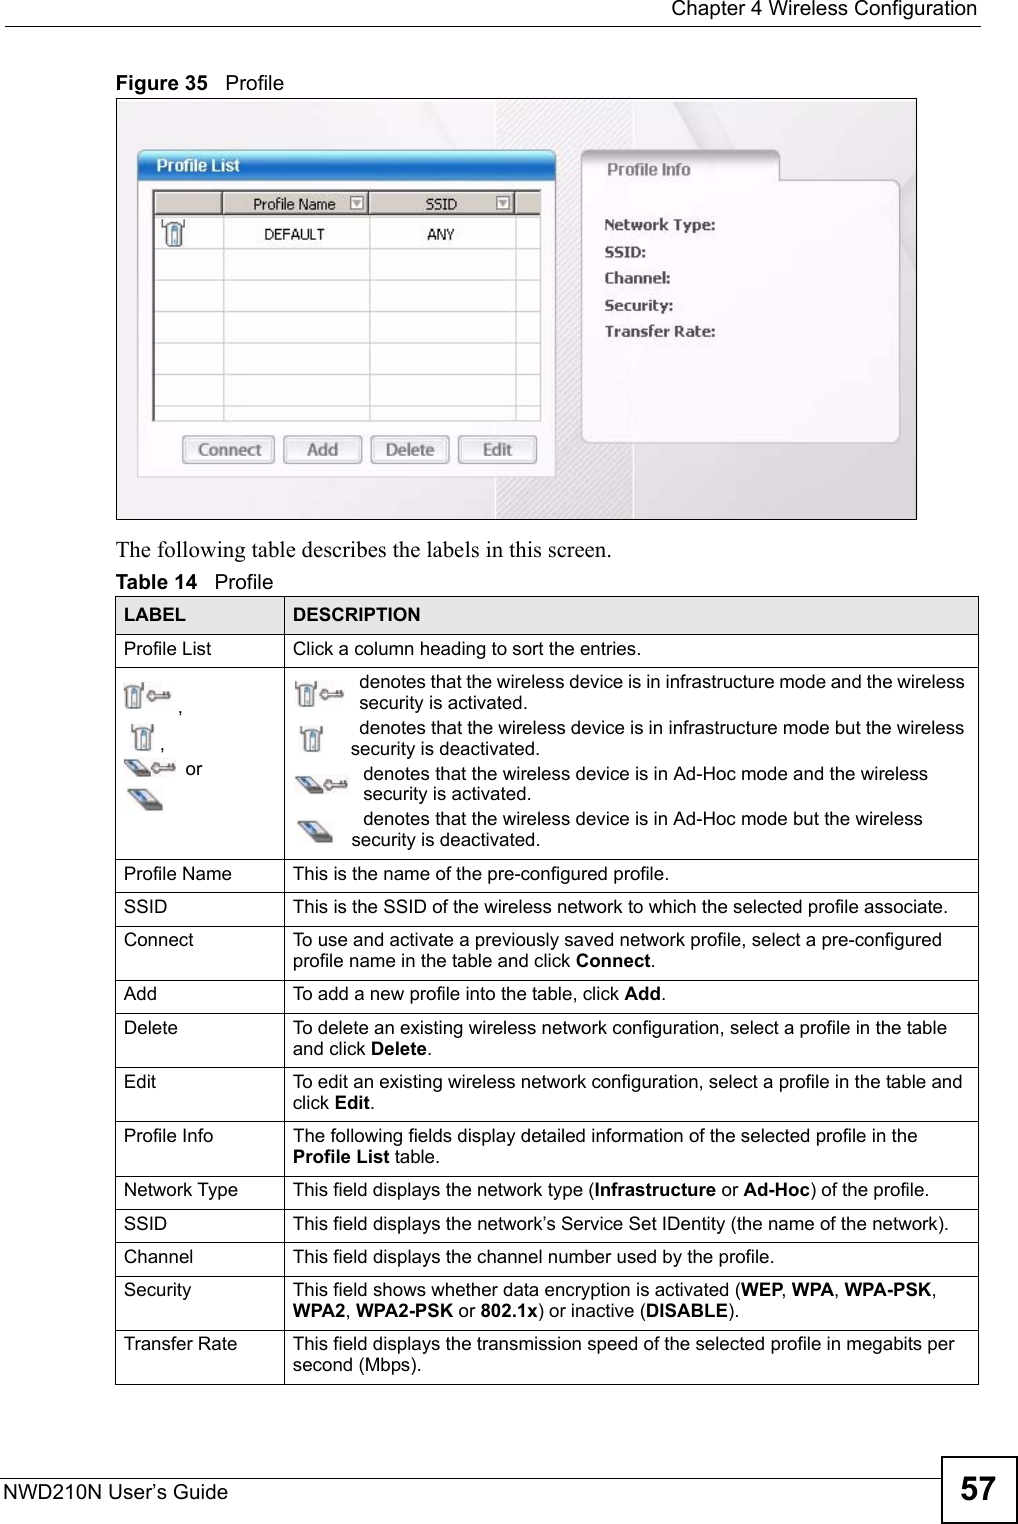  Chapter 4 Wireless ConfigurationNWD210N User’s Guide 57Figure 35   Profile  The following table describes the labels in this screen. Table 14   Profile LABEL DESCRIPTIONProfile List Click a column heading to sort the entries.,, ordenotes that the wireless device is in infrastructure mode and the wireless security is activated.denotes that the wireless device is in infrastructure mode but the wireless security is deactivated.denotes that the wireless device is in Ad-Hoc mode and the wireless security is activated.denotes that the wireless device is in Ad-Hoc mode but the wireless security is deactivated.Profile Name This is the name of the pre-configured profile.SSID This is the SSID of the wireless network to which the selected profile associate.Connect  To use and activate a previously saved network profile, select a pre-configured profile name in the table and click Connect.Add  To add a new profile into the table, click Add.Delete To delete an existing wireless network configuration, select a profile in the table and click Delete.Edit To edit an existing wireless network configuration, select a profile in the table and click Edit.Profile Info The following fields display detailed information of the selected profile in the Profile List table.Network Type This field displays the network type (Infrastructure or Ad-Hoc) of the profile.SSID This field displays the network’s Service Set IDentity (the name of the network).Channel This field displays the channel number used by the profile.Security This field shows whether data encryption is activated (WEP, WPA, WPA-PSK, WPA2, WPA2-PSK or 802.1x) or inactive (DISABLE).Transfer Rate This field displays the transmission speed of the selected profile in megabits per second (Mbps).